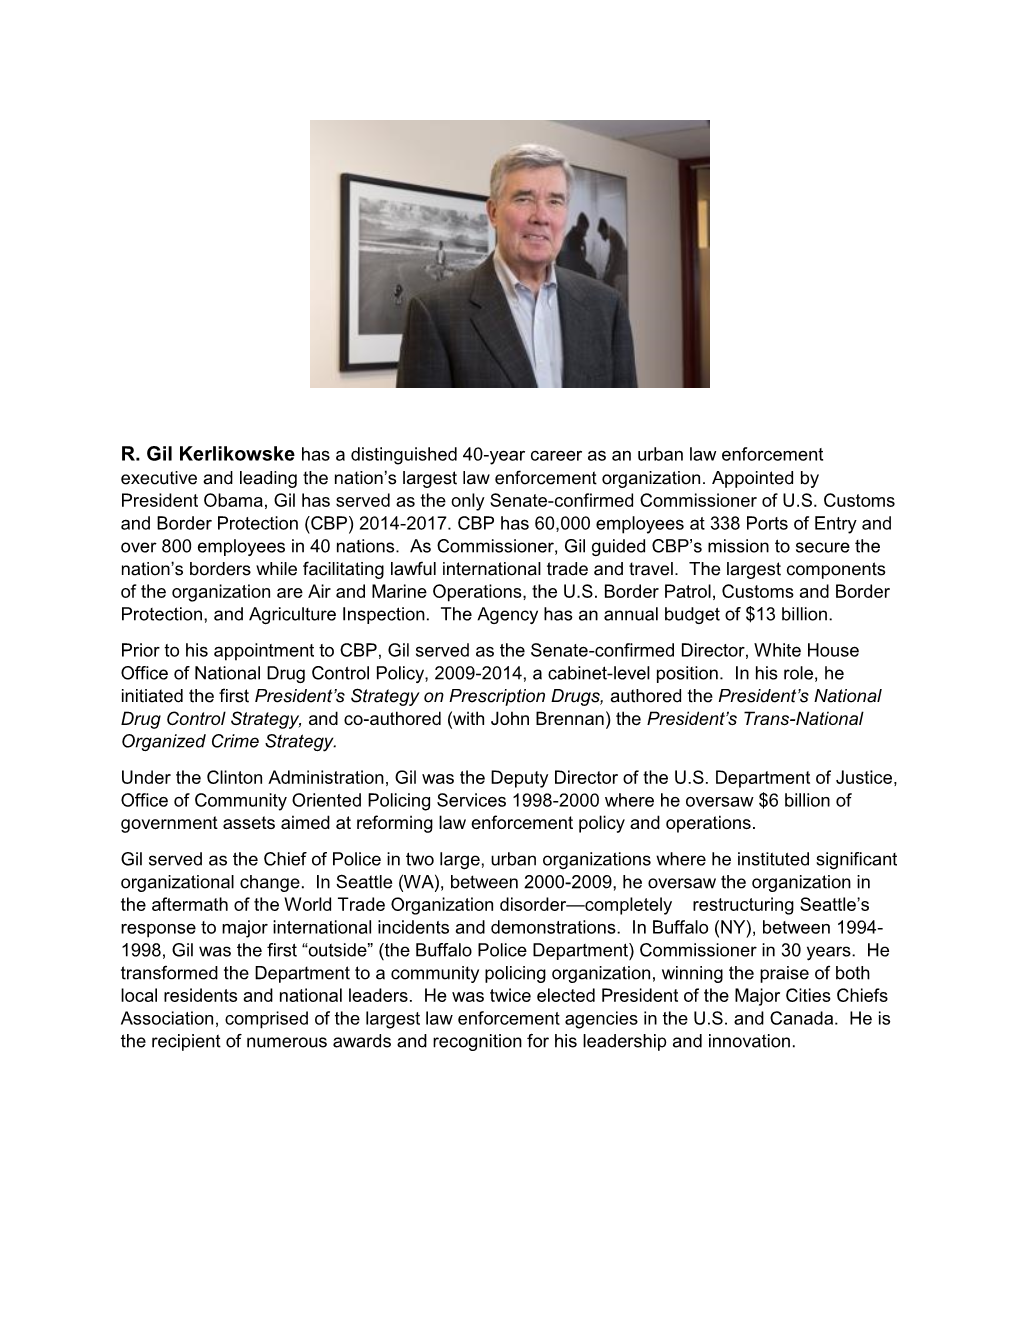 R. Gil Kerlikowske Has a Distinguished 40-Year Career As an Urban Law Enforcement Executive and Leading the Nation’S Largest Law Enforcement Organization